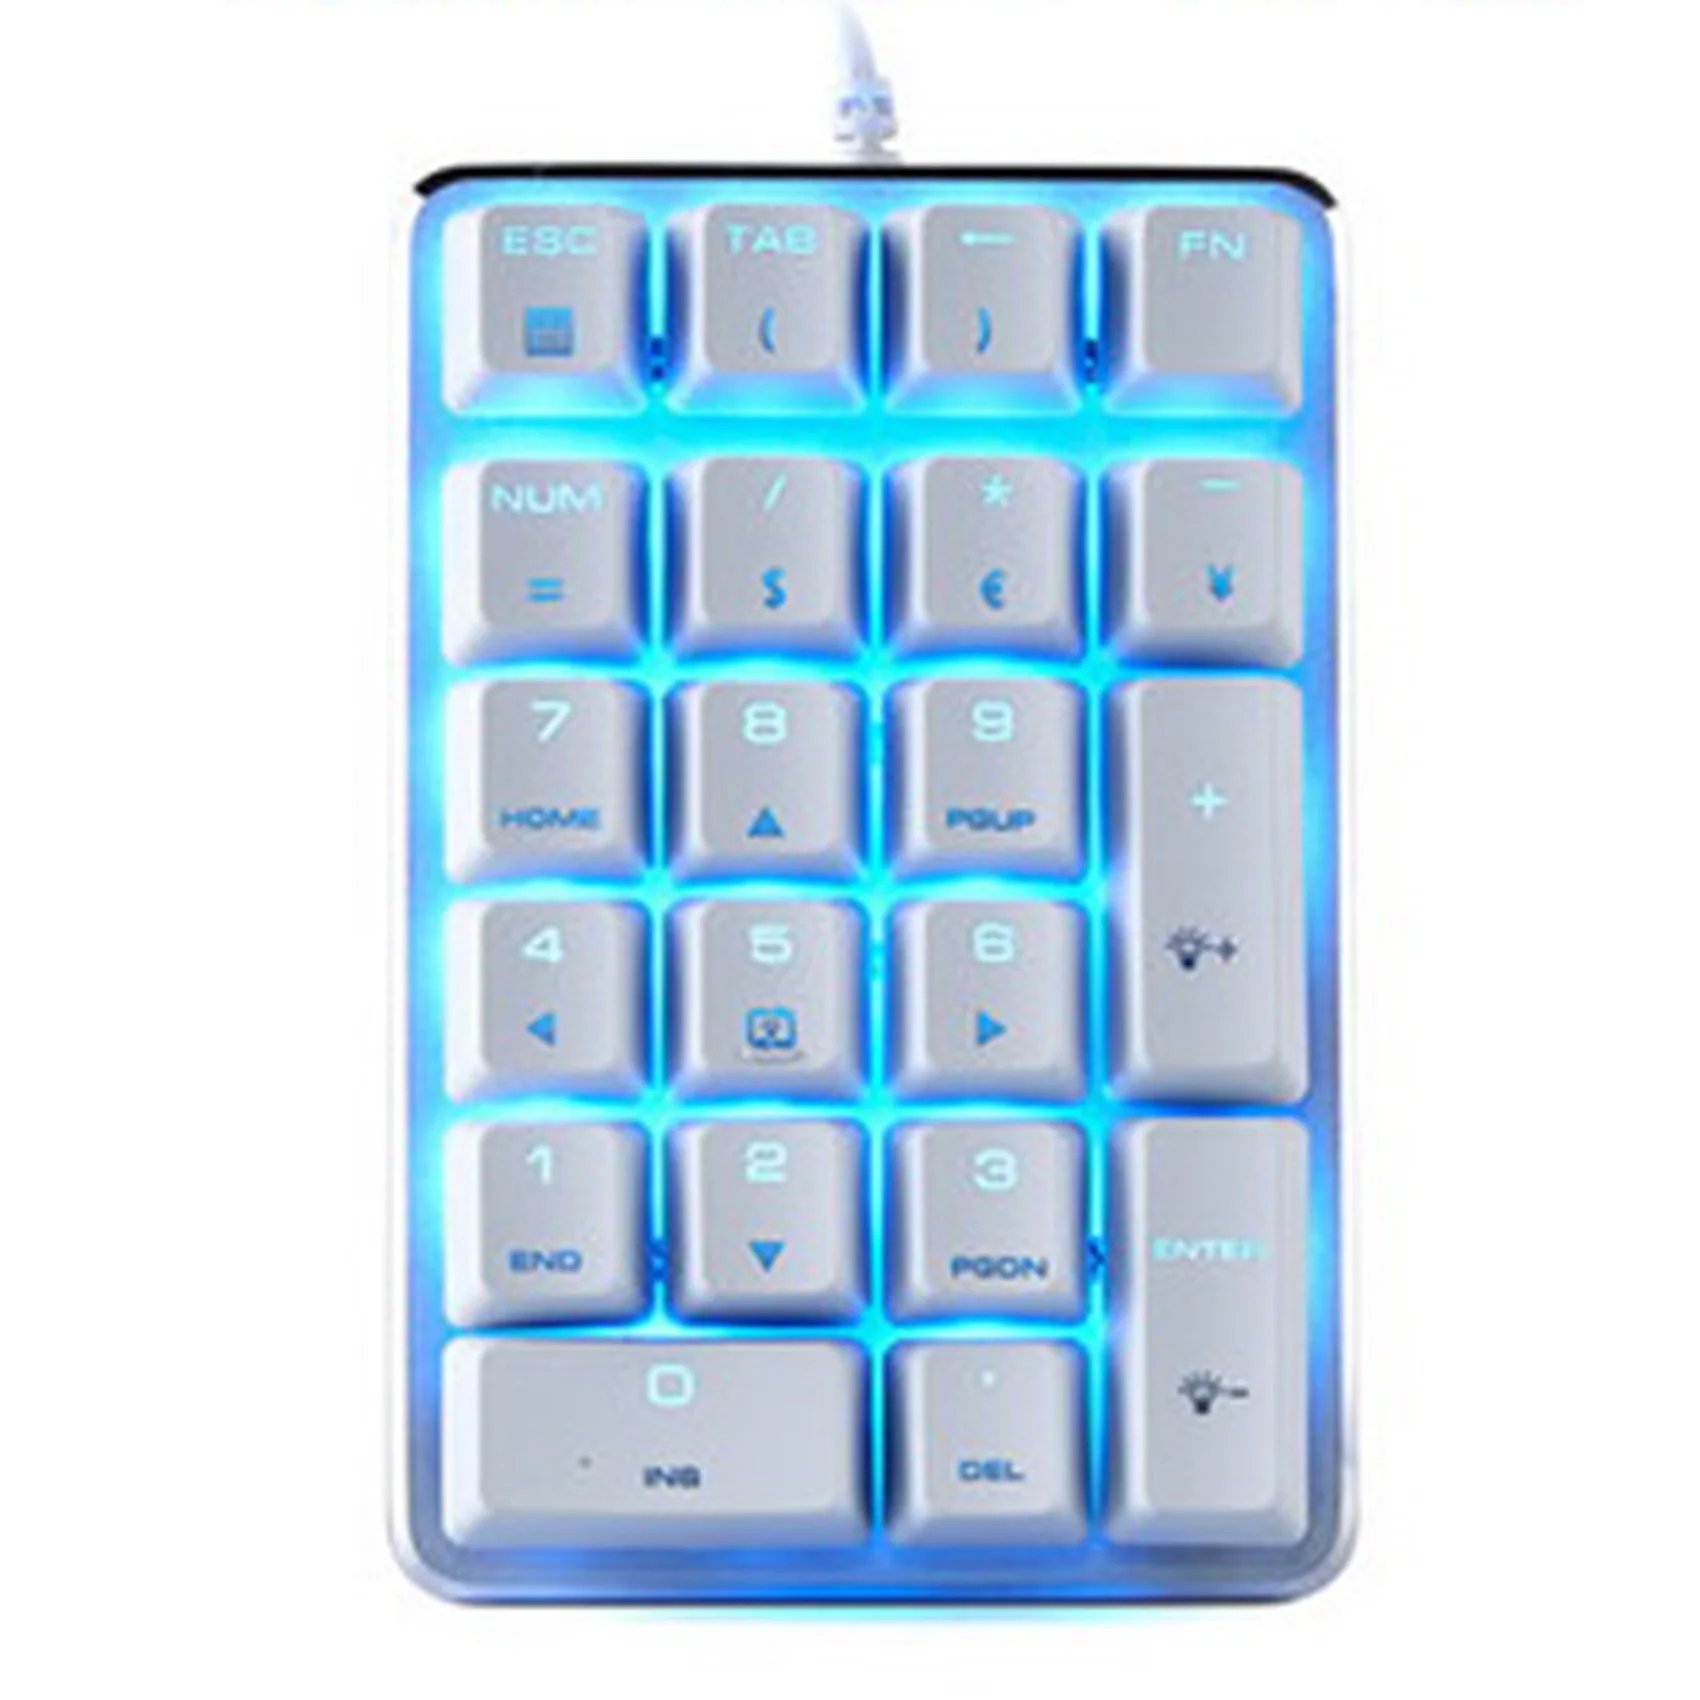 

USB Wired Mechanical Numeric Keypad 21-Key Illuminated Keyboard Suitable for Finance Commerce Bank Counter Cashier White